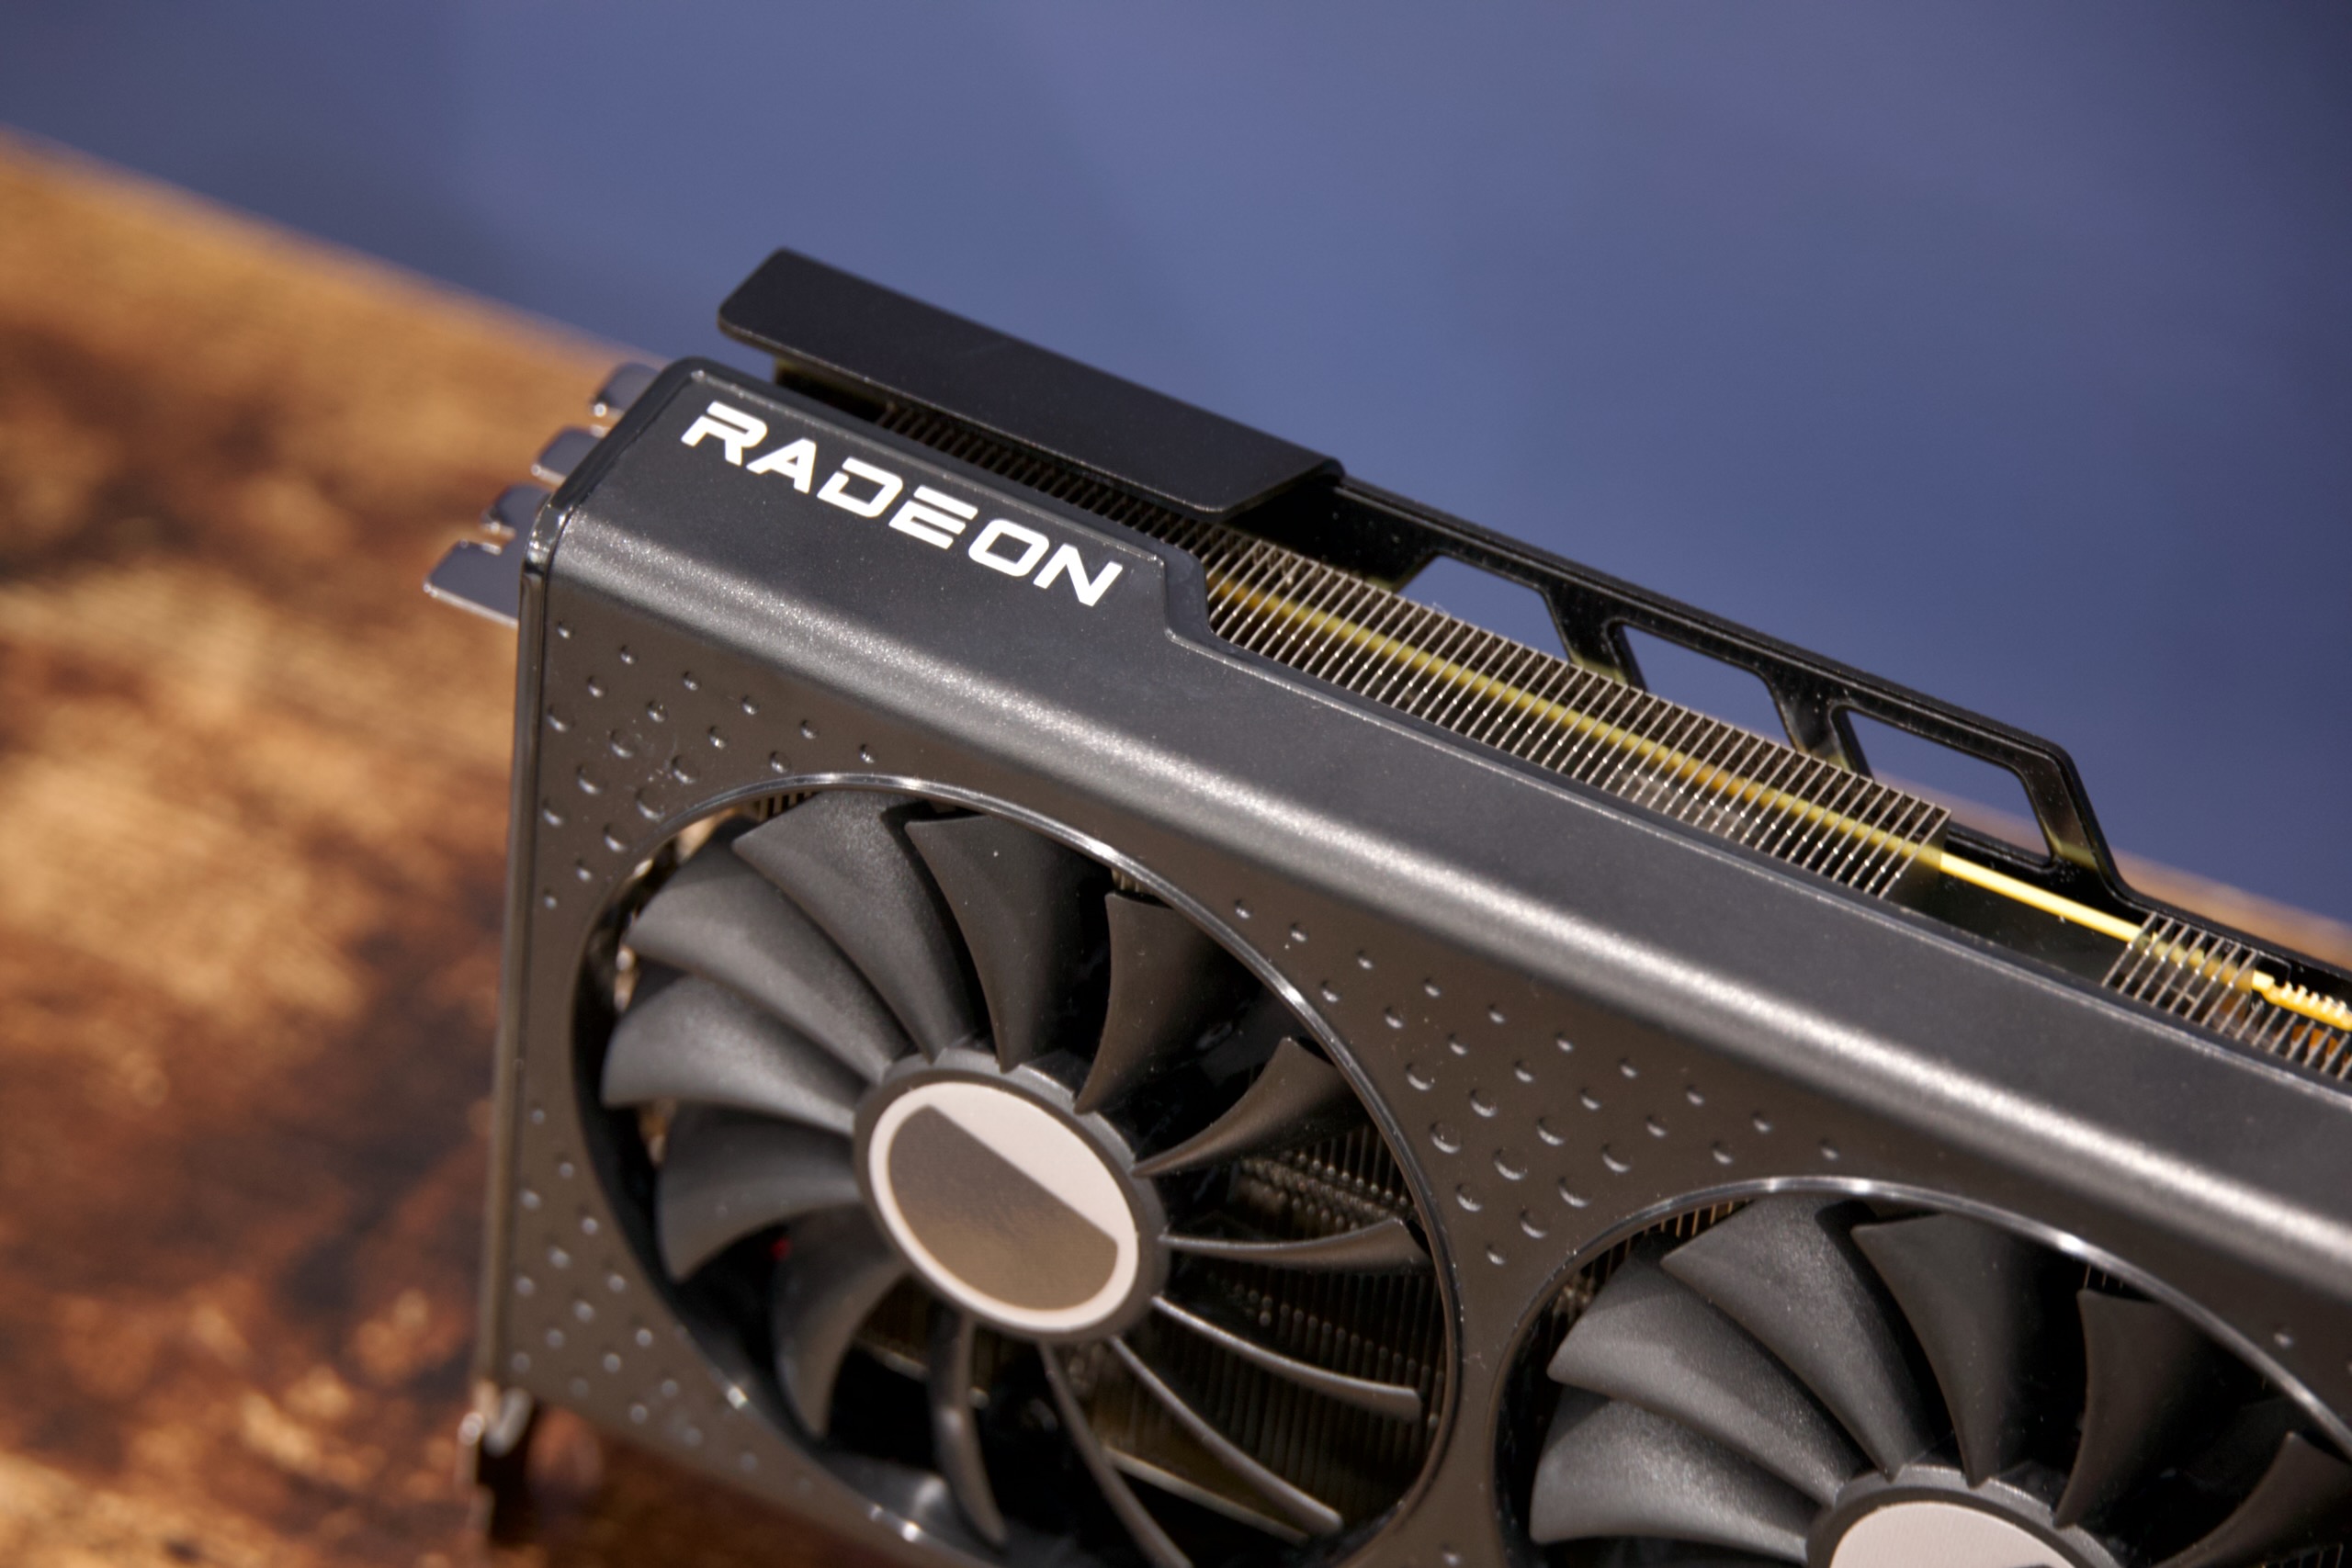 Review: Radeon 7600 XT offers peace of mind via lots of RAM, remains a  mid-range GPU